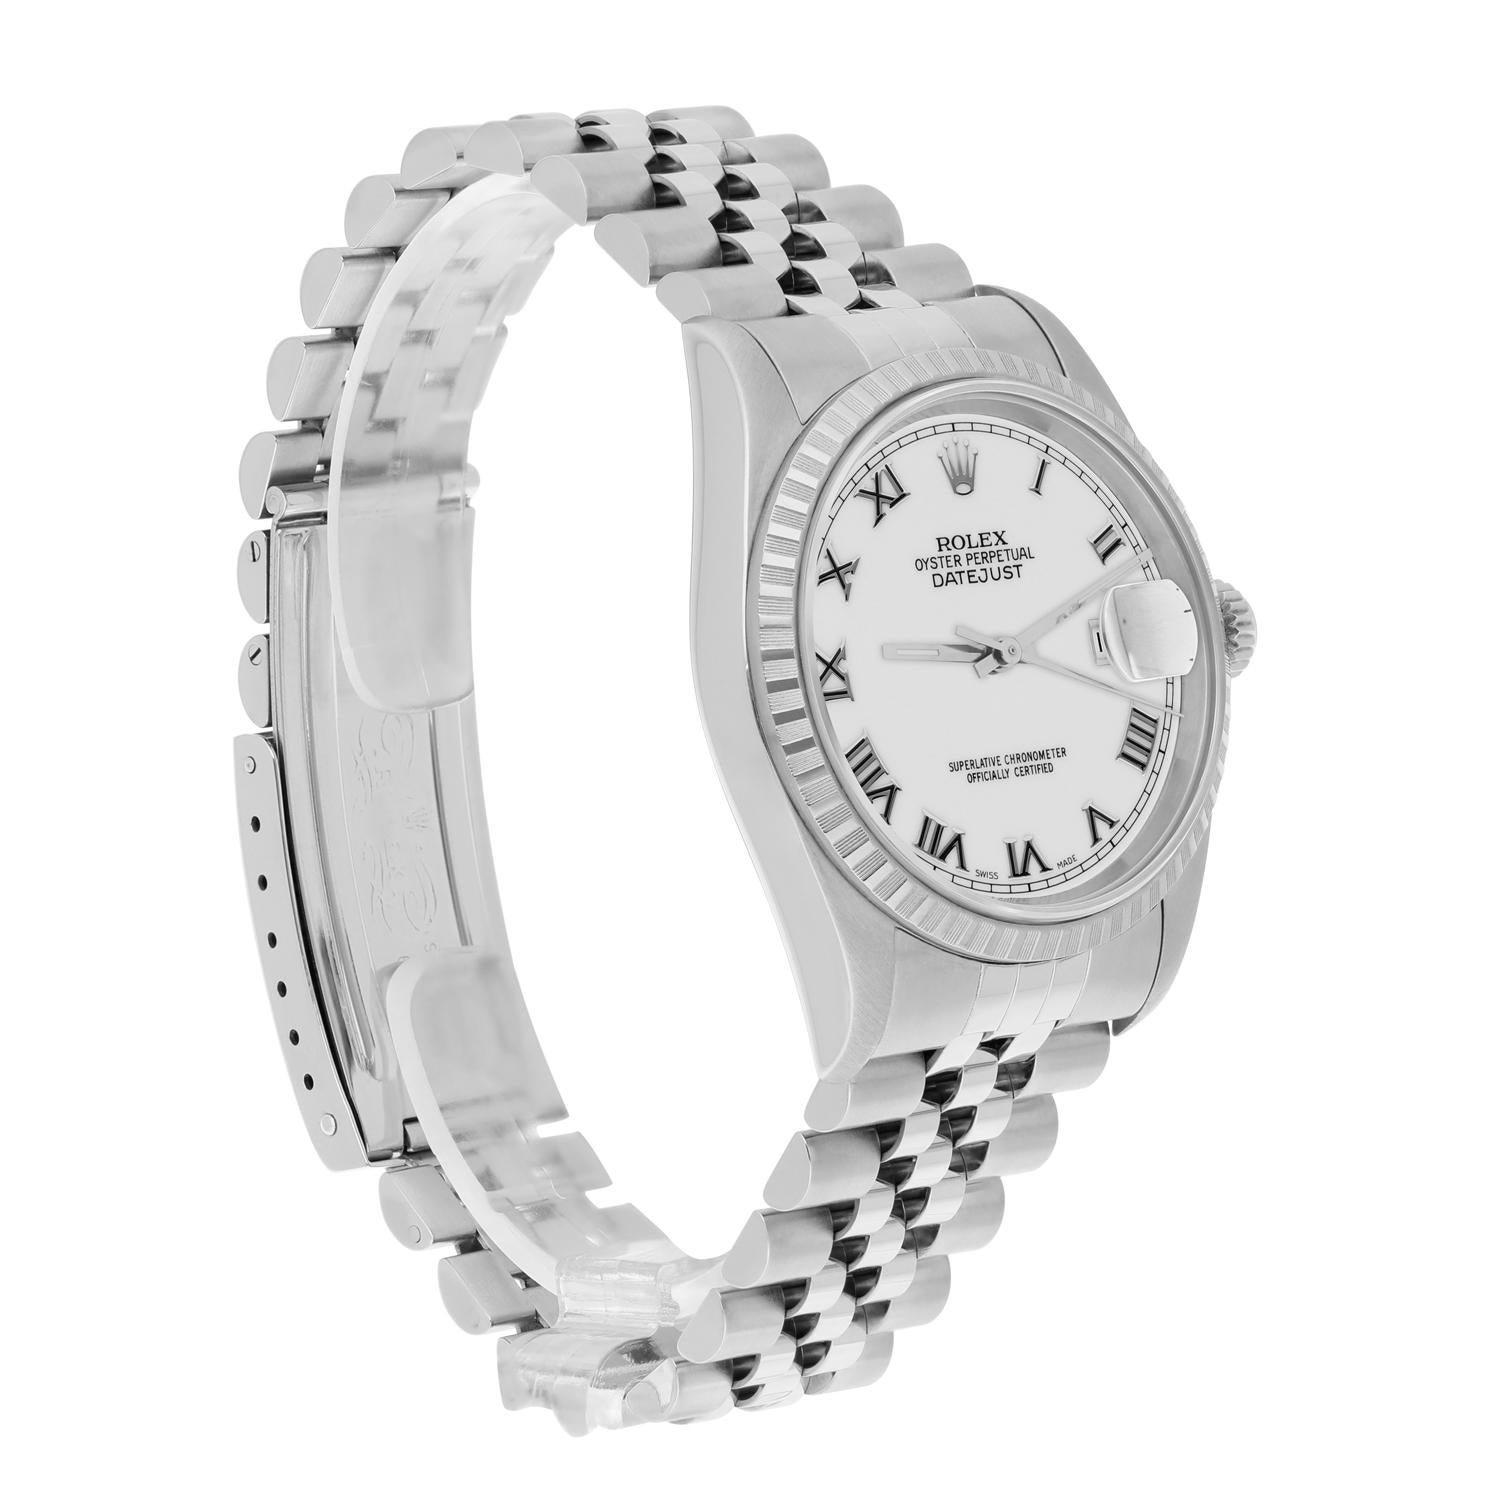 Rolex Datejust 36mm Stainless Steel Watch White Roman Dial 16220 Circa 2000 For Sale 2